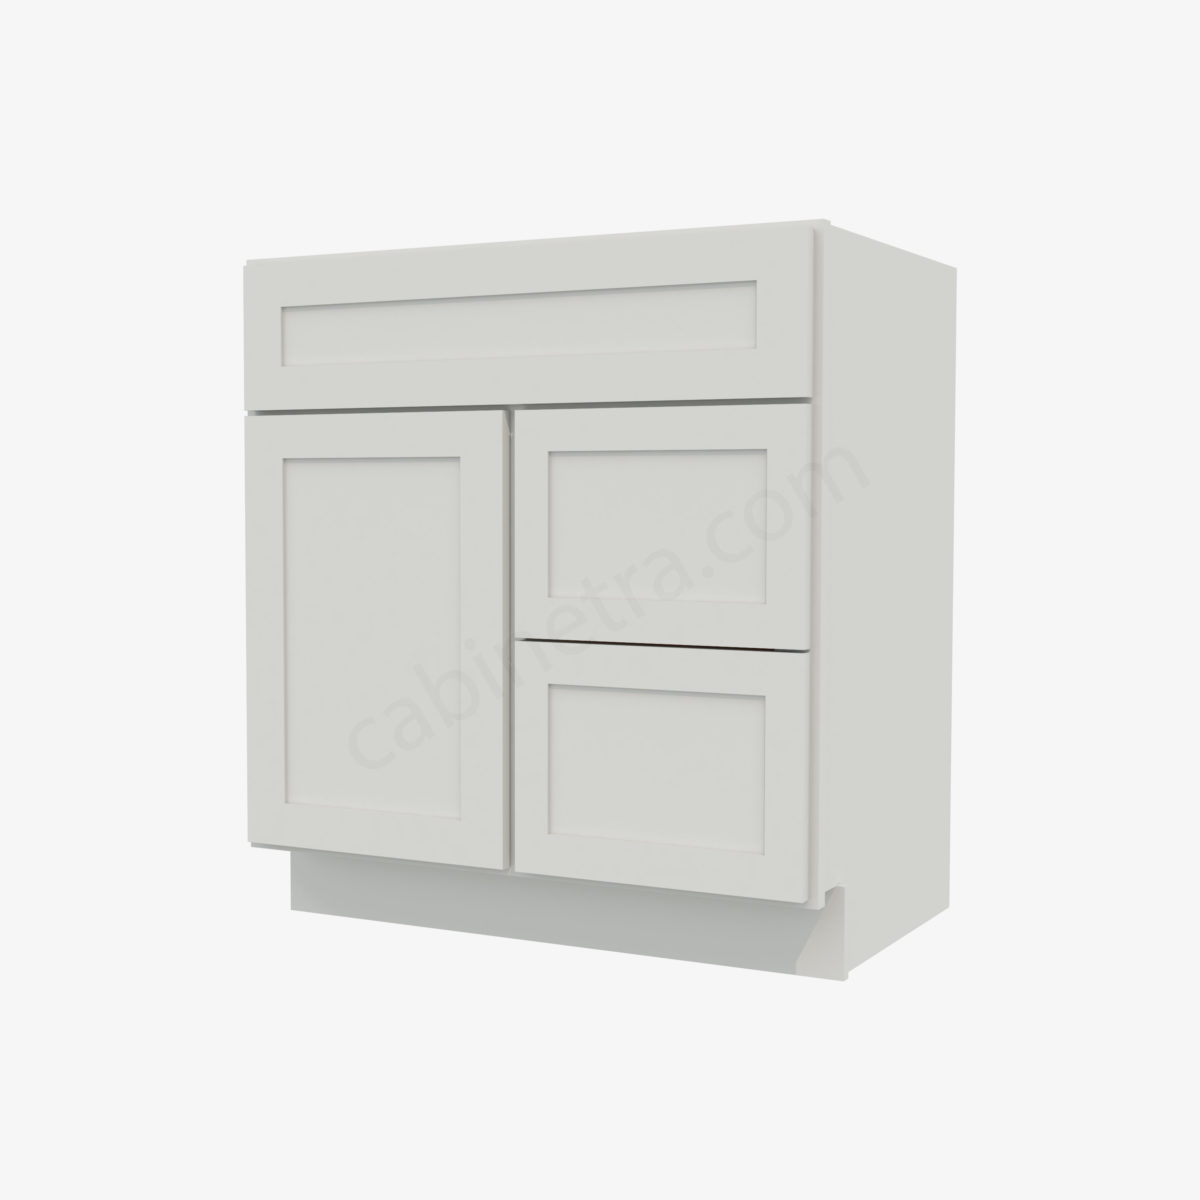 AW S3021DR 34 0 Forevermark Ice White Shaker Cabinetra scaled